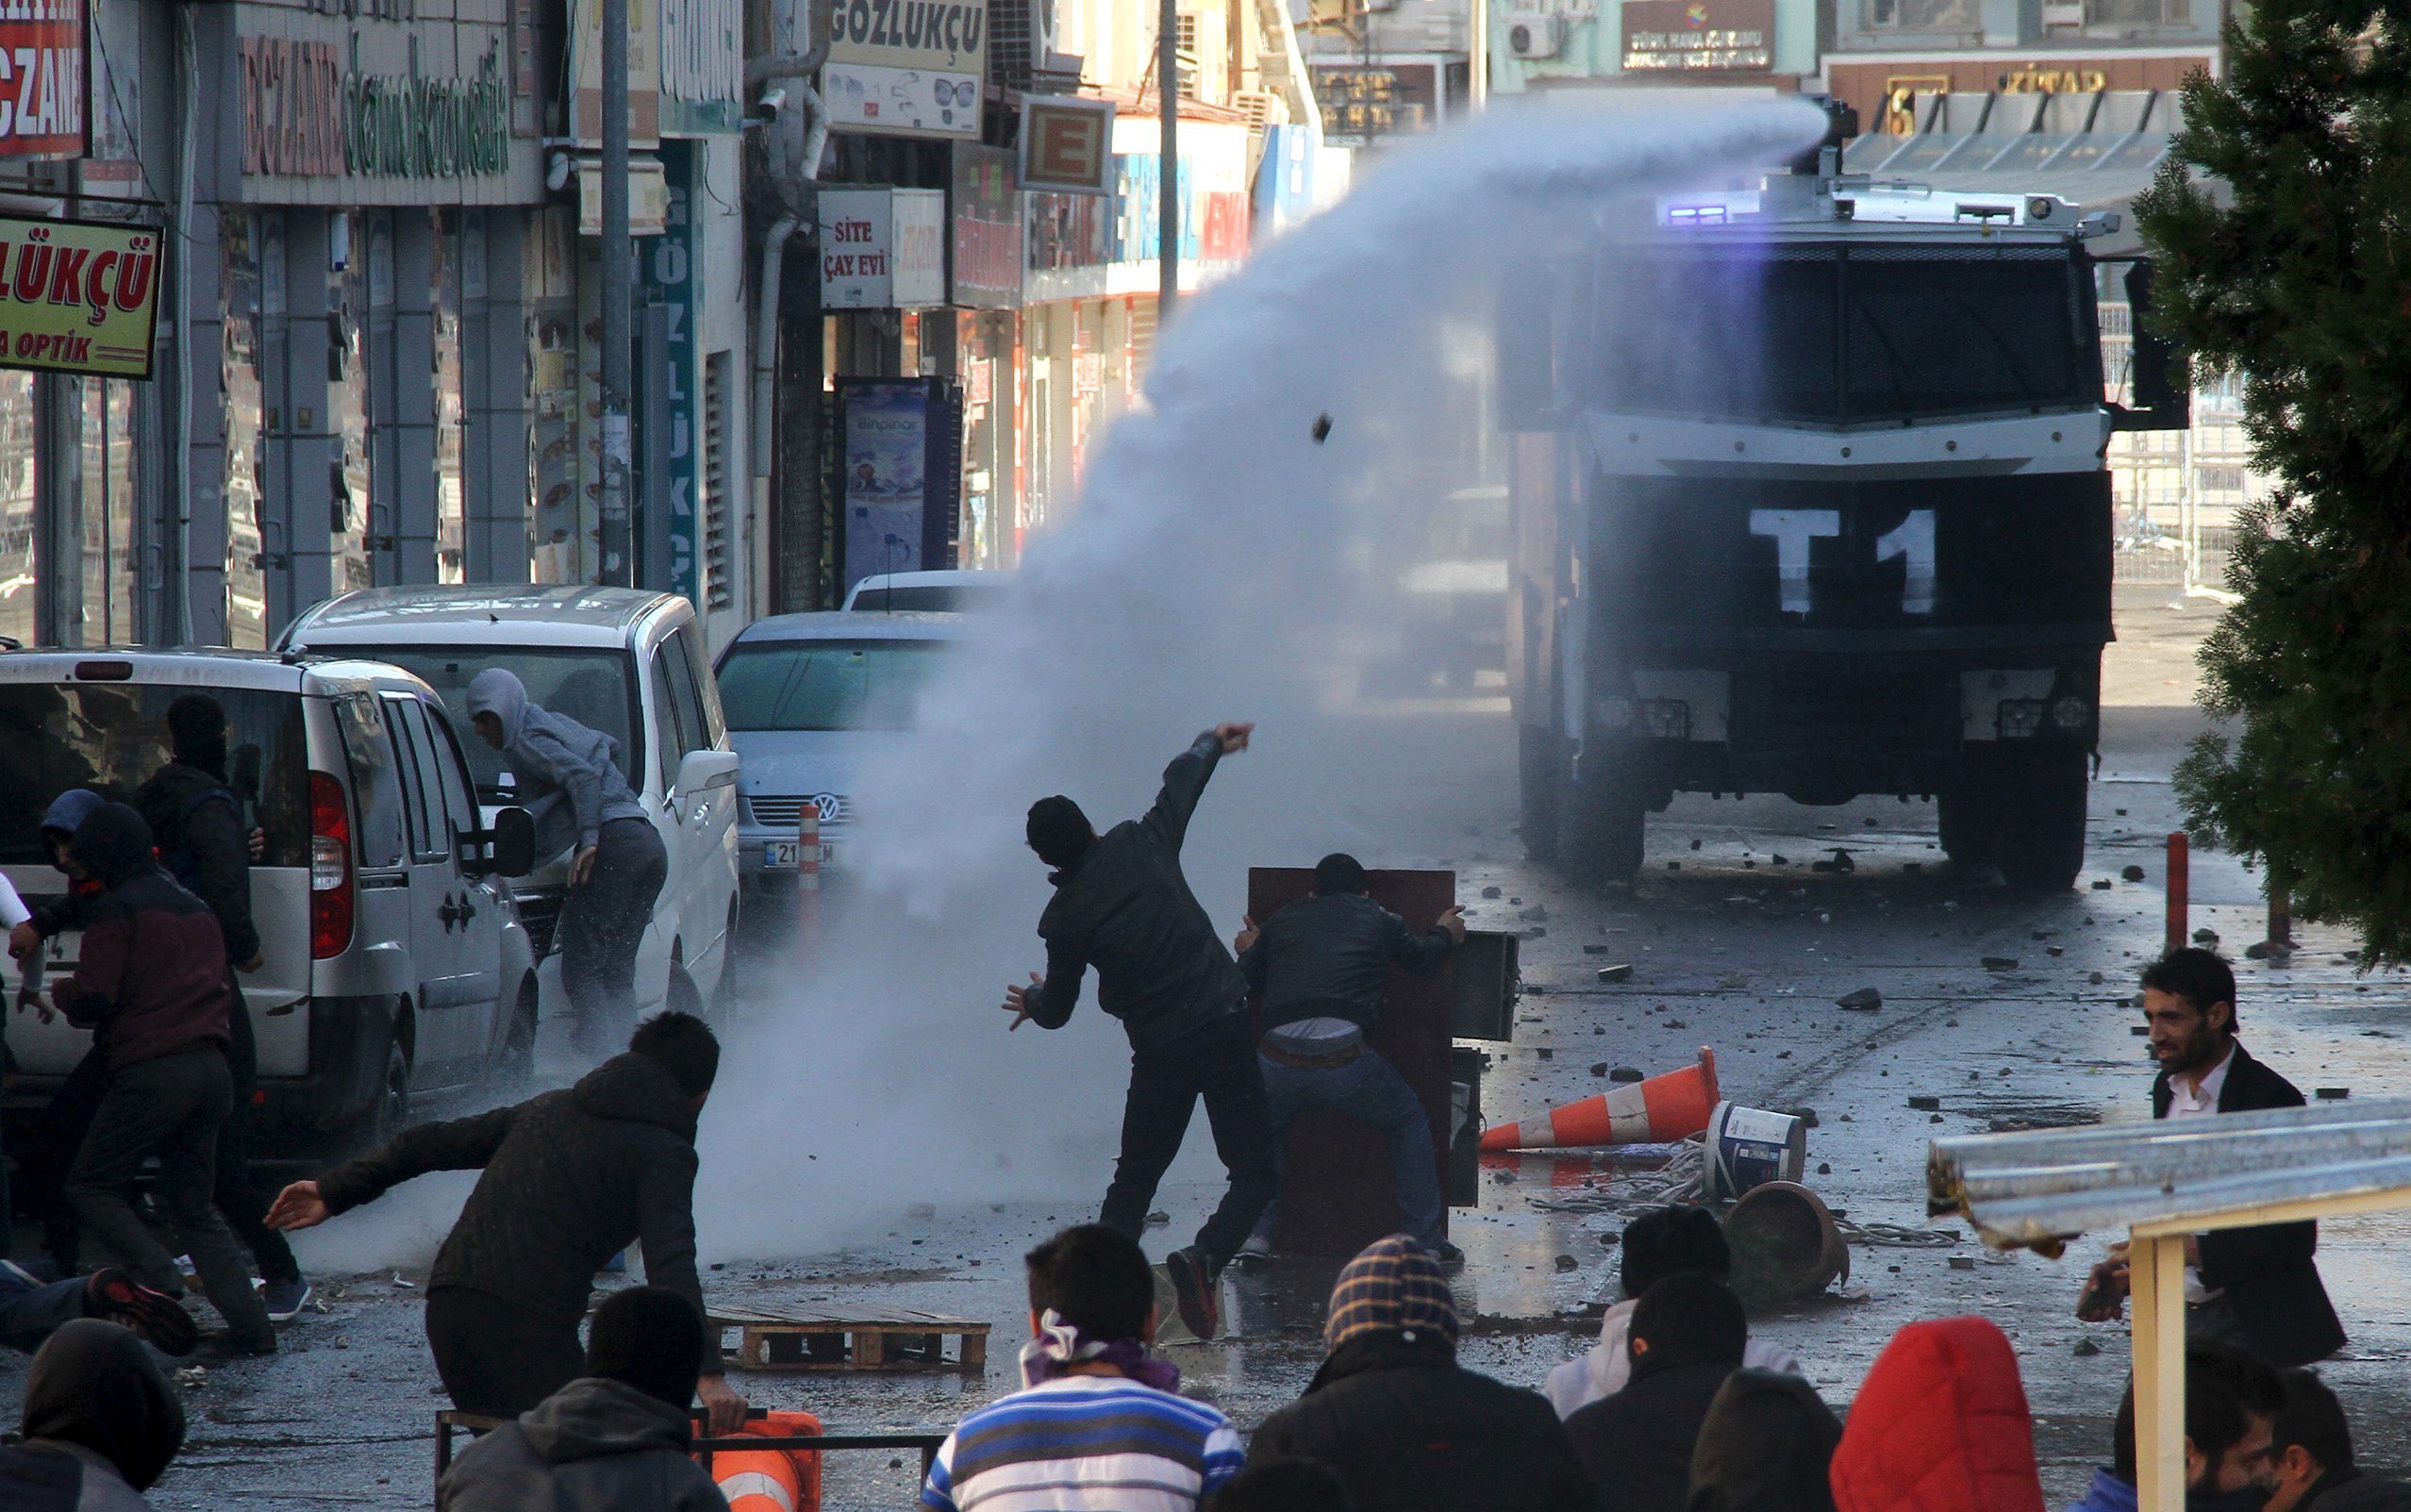 Riot police use a water cannon to disperse stone throwing Kurdish demonstrators during a protest against the curfew in Sur district, in the southeastern city of Diyarbakir, Turkey, December 22, 2015